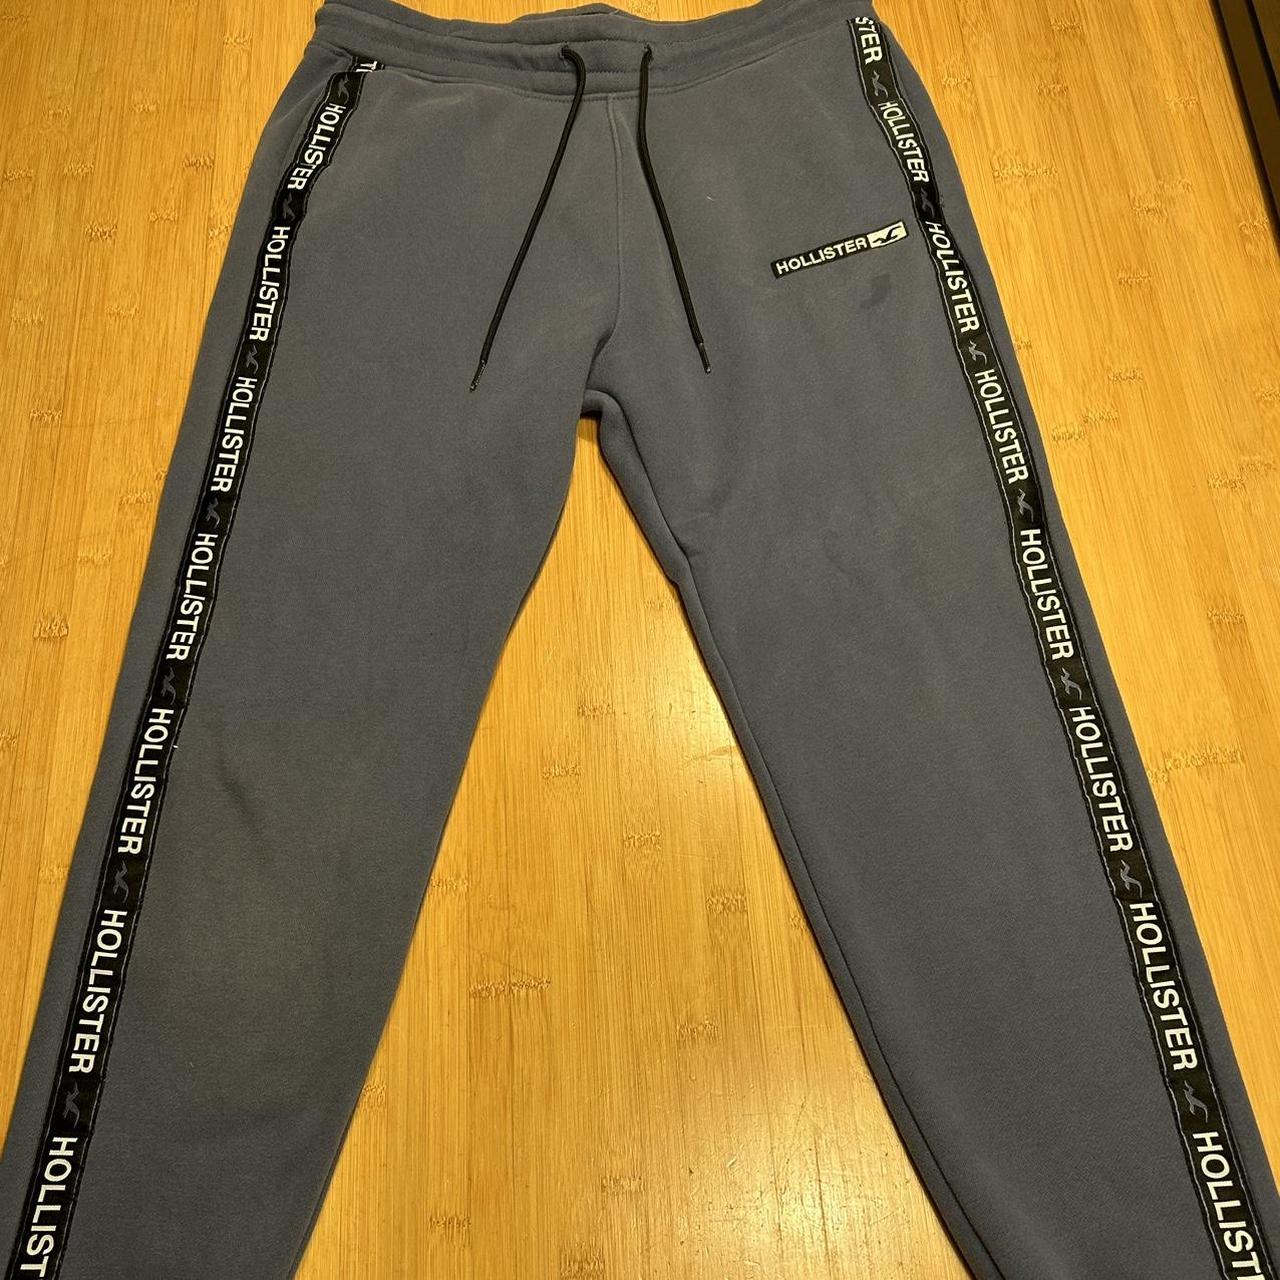 Hollister Joggers, Sweatpants & Trackpants for Women on sale